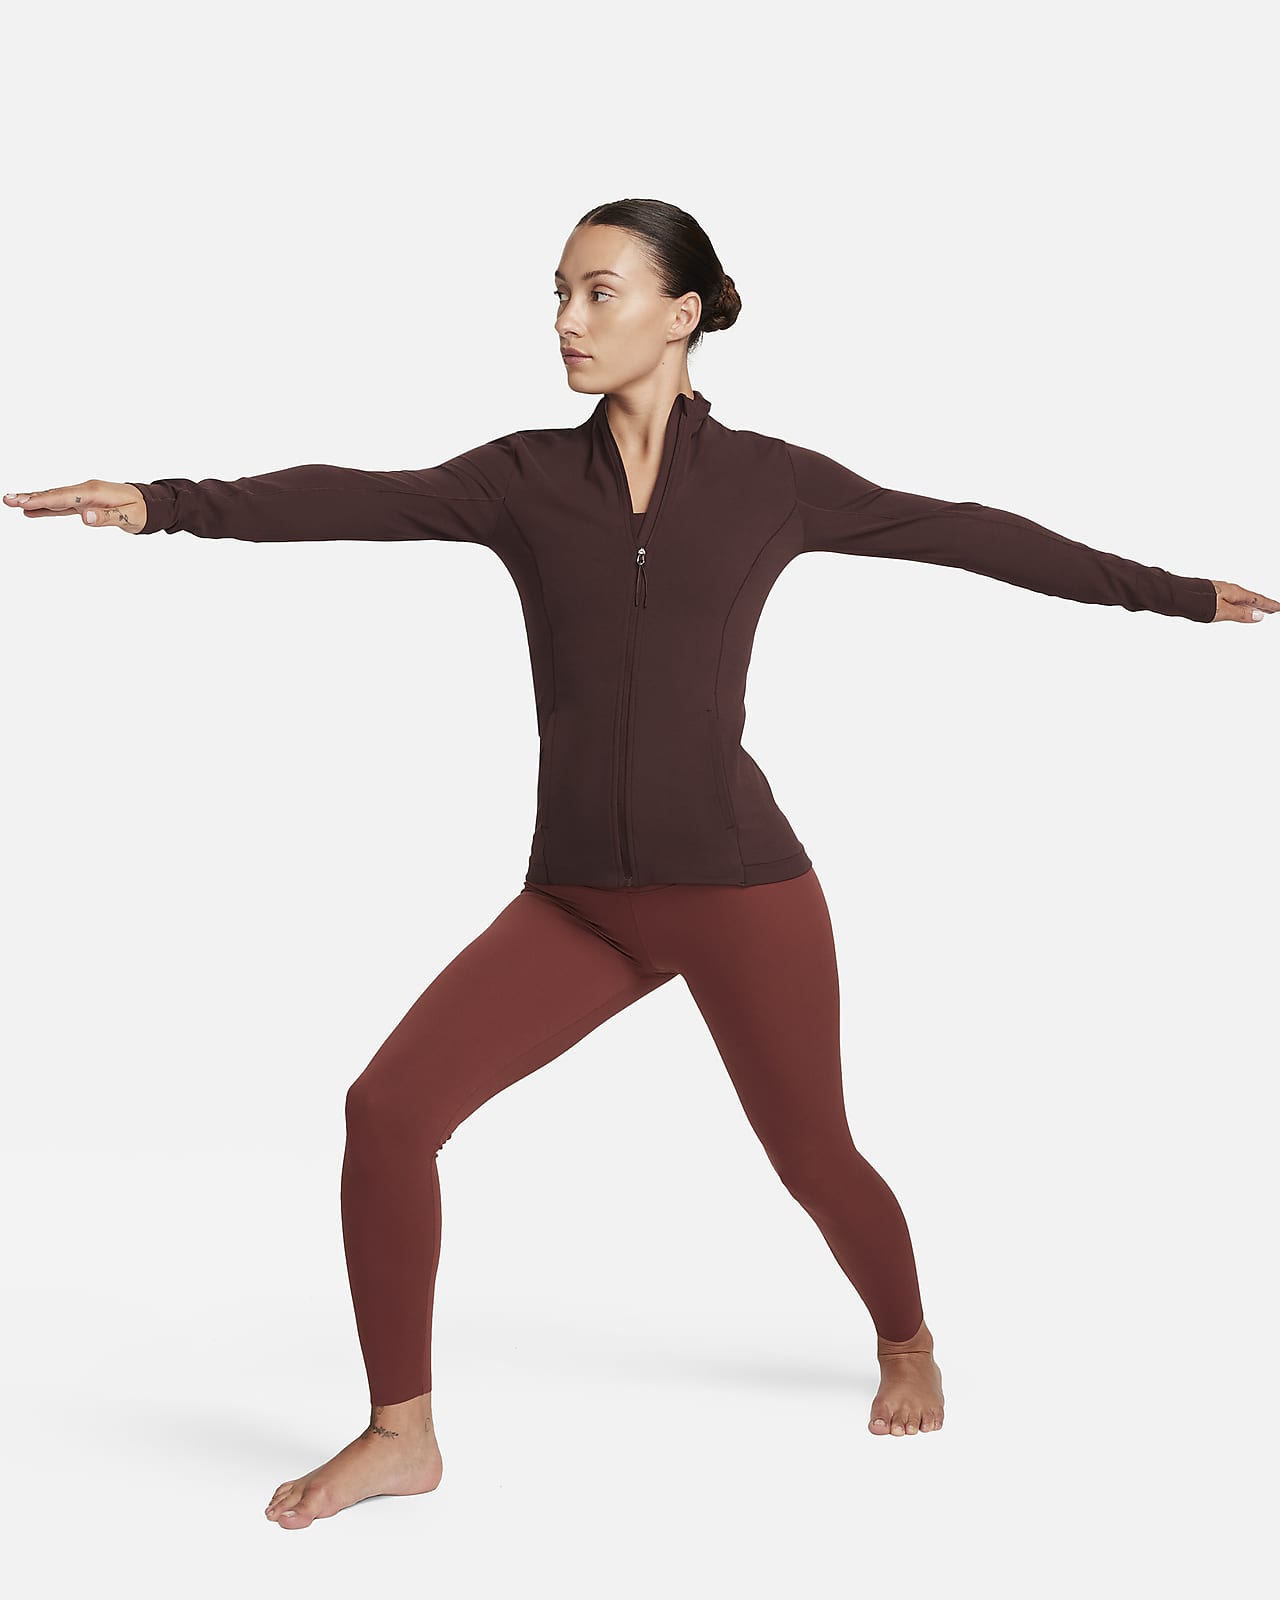 https://static.nike.com/a/images/t_PDP_1280_v1/f_auto,q_auto:eco/8ba6a2c2-ea44-4ebf-a394-4660e8234c16/yoga-dri-fit-luxe-womens-fitted-jacket-psM6fn.png